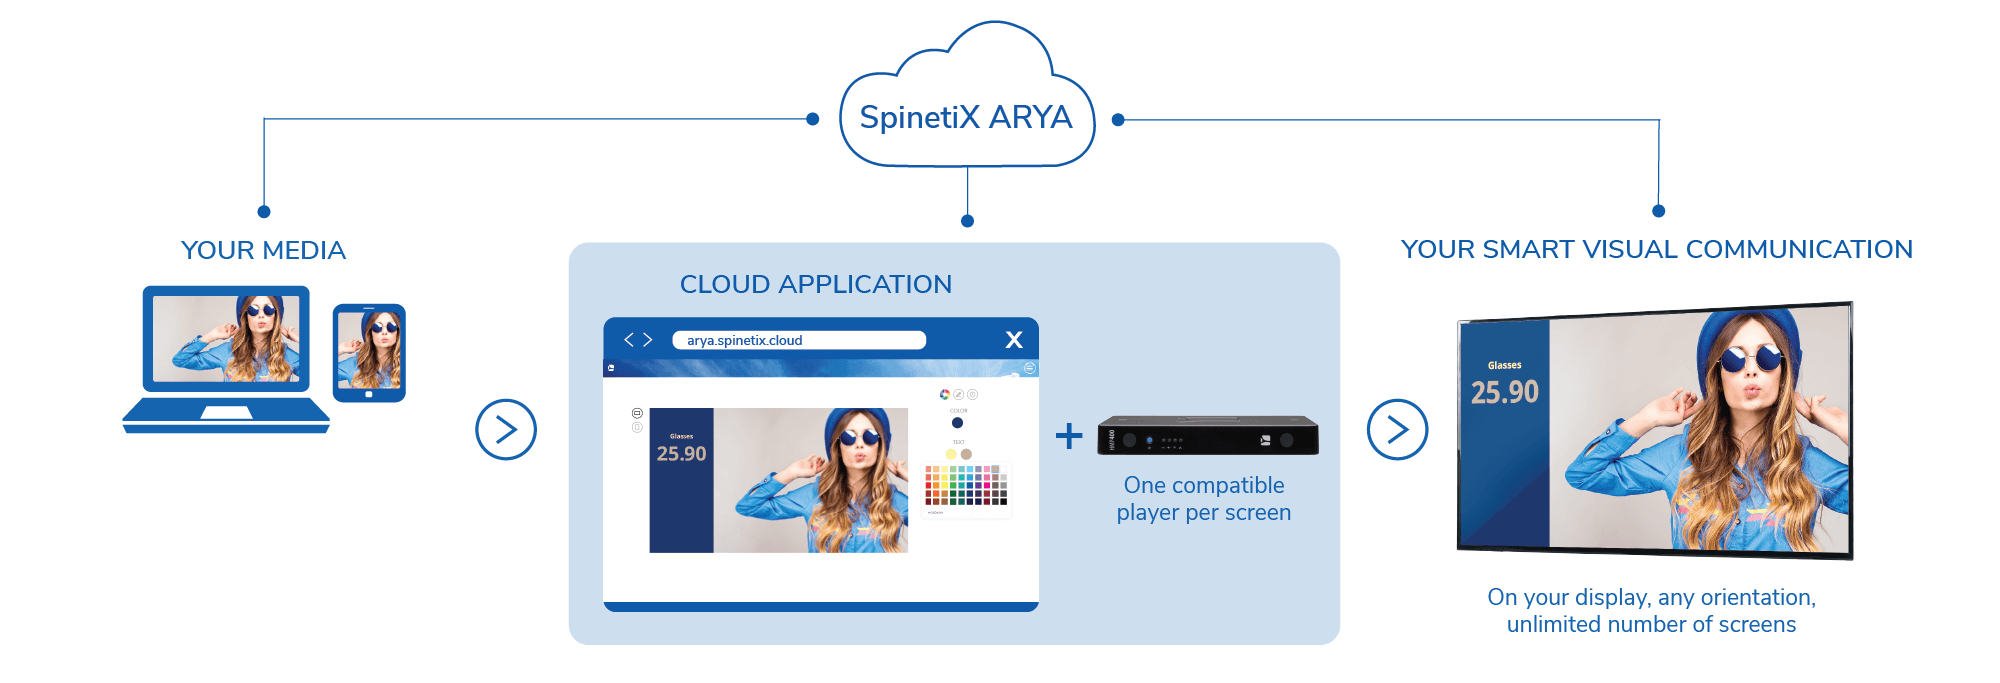 infographic explaining how to get started with spinetix arya digital signage cloud